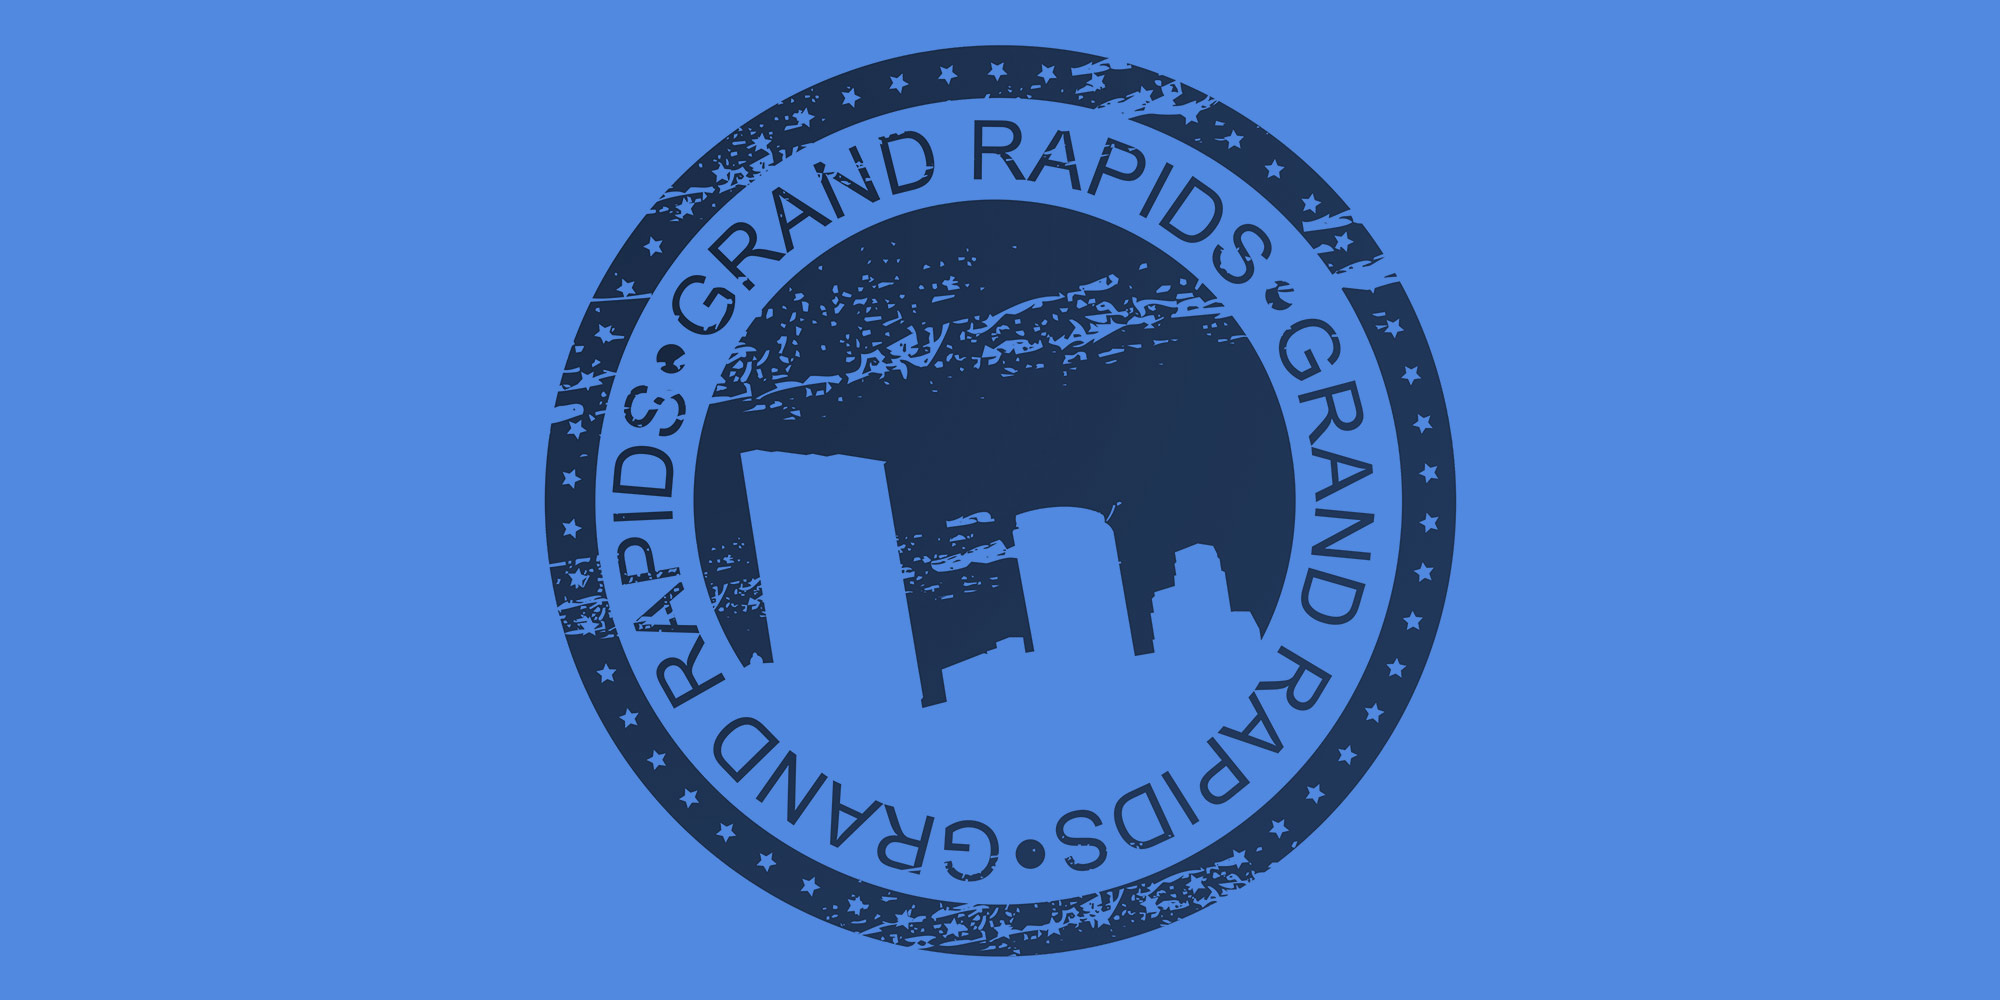 A round seal that says "Grand Rapids" around the circumference and shows an illustration of the Grand Rapids skyline. How to get Suboxone treatment in Grand Rapids, MI